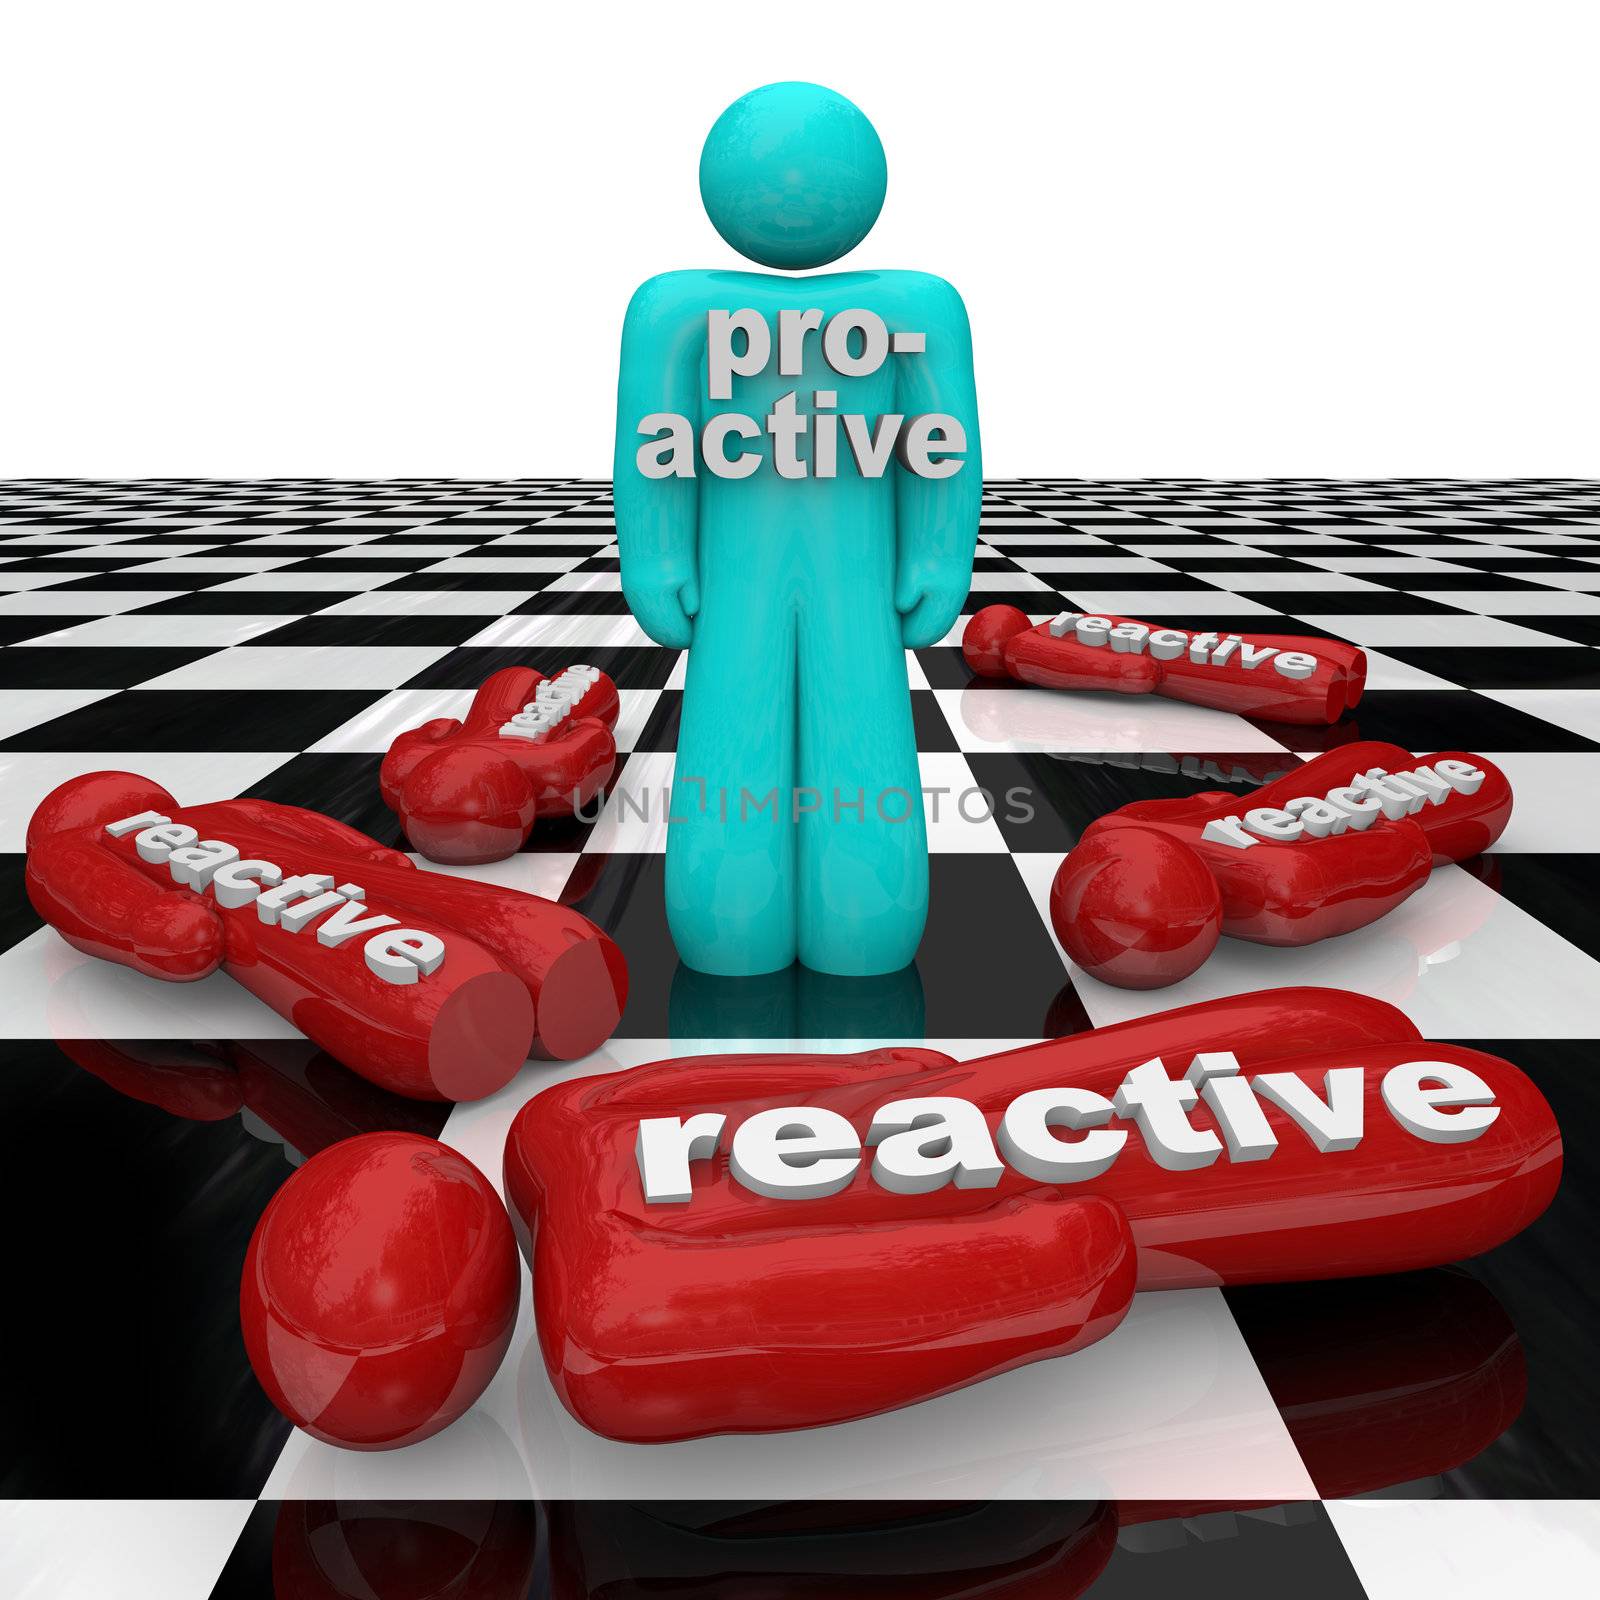 Proactive Person Wins Vs Reactive Inactivity People Lose by iQoncept